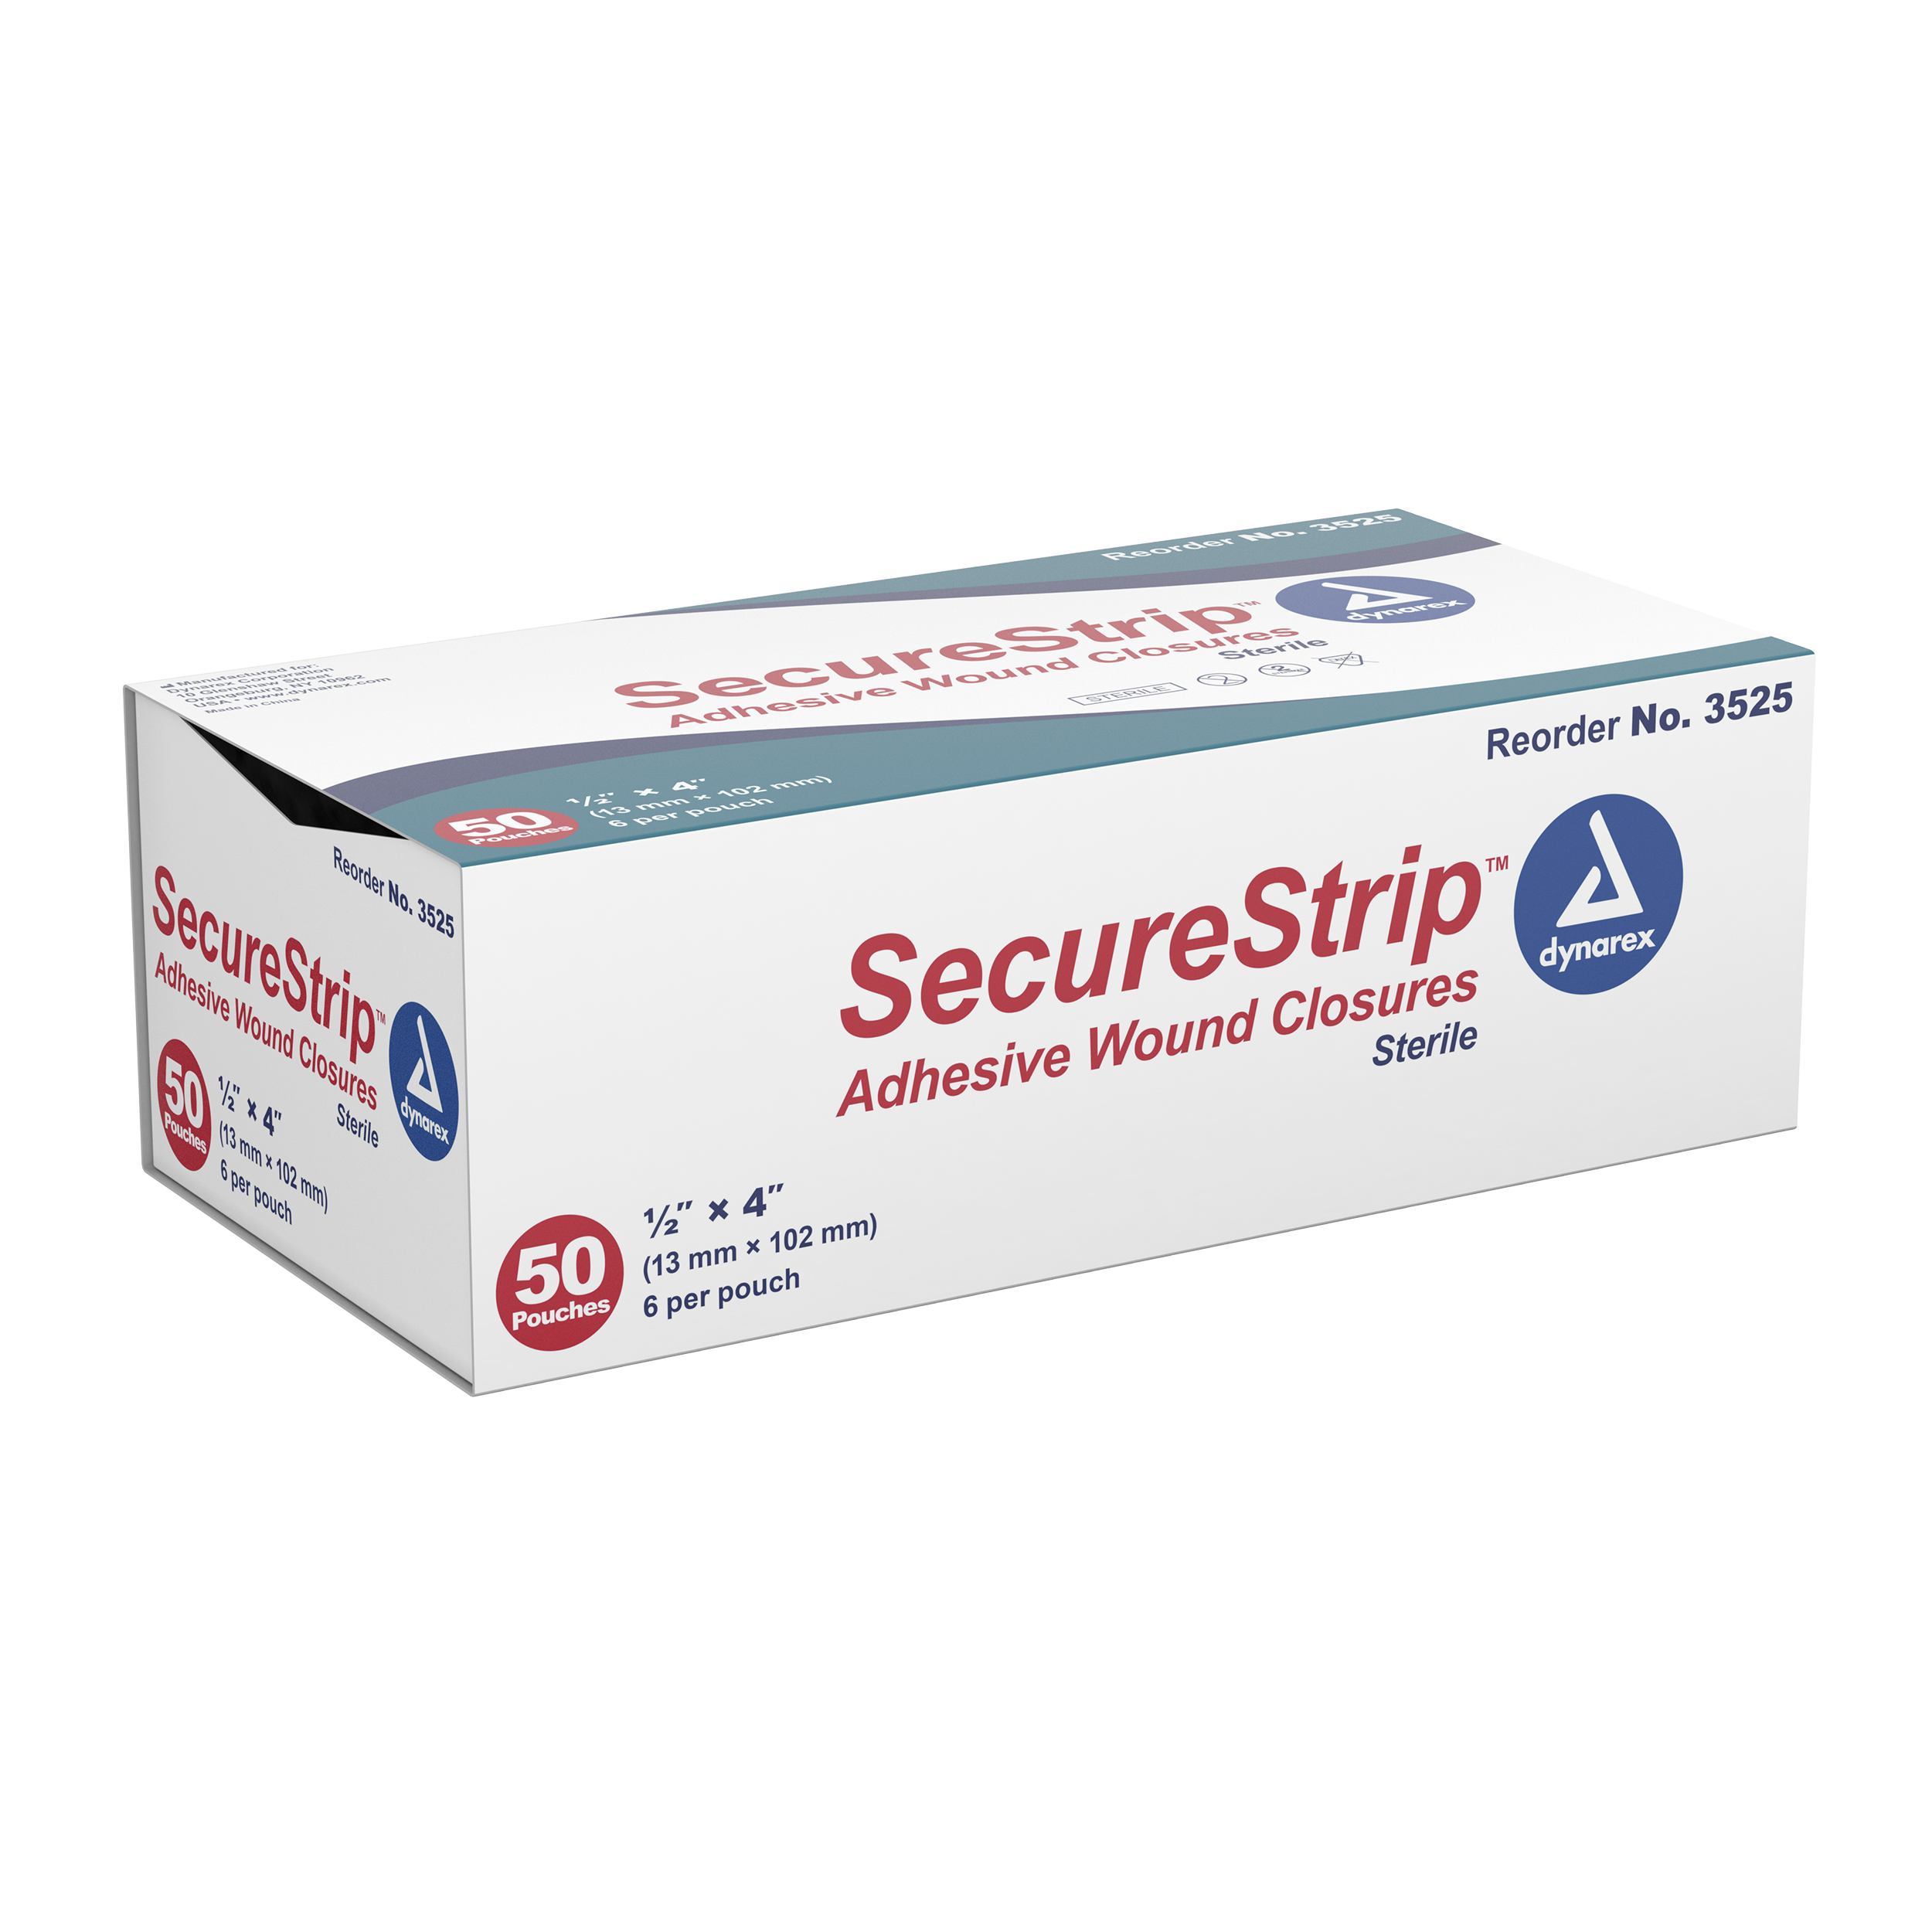 SecureStrip Adhesive Wound Closures - 1/2in x 4in Sterile